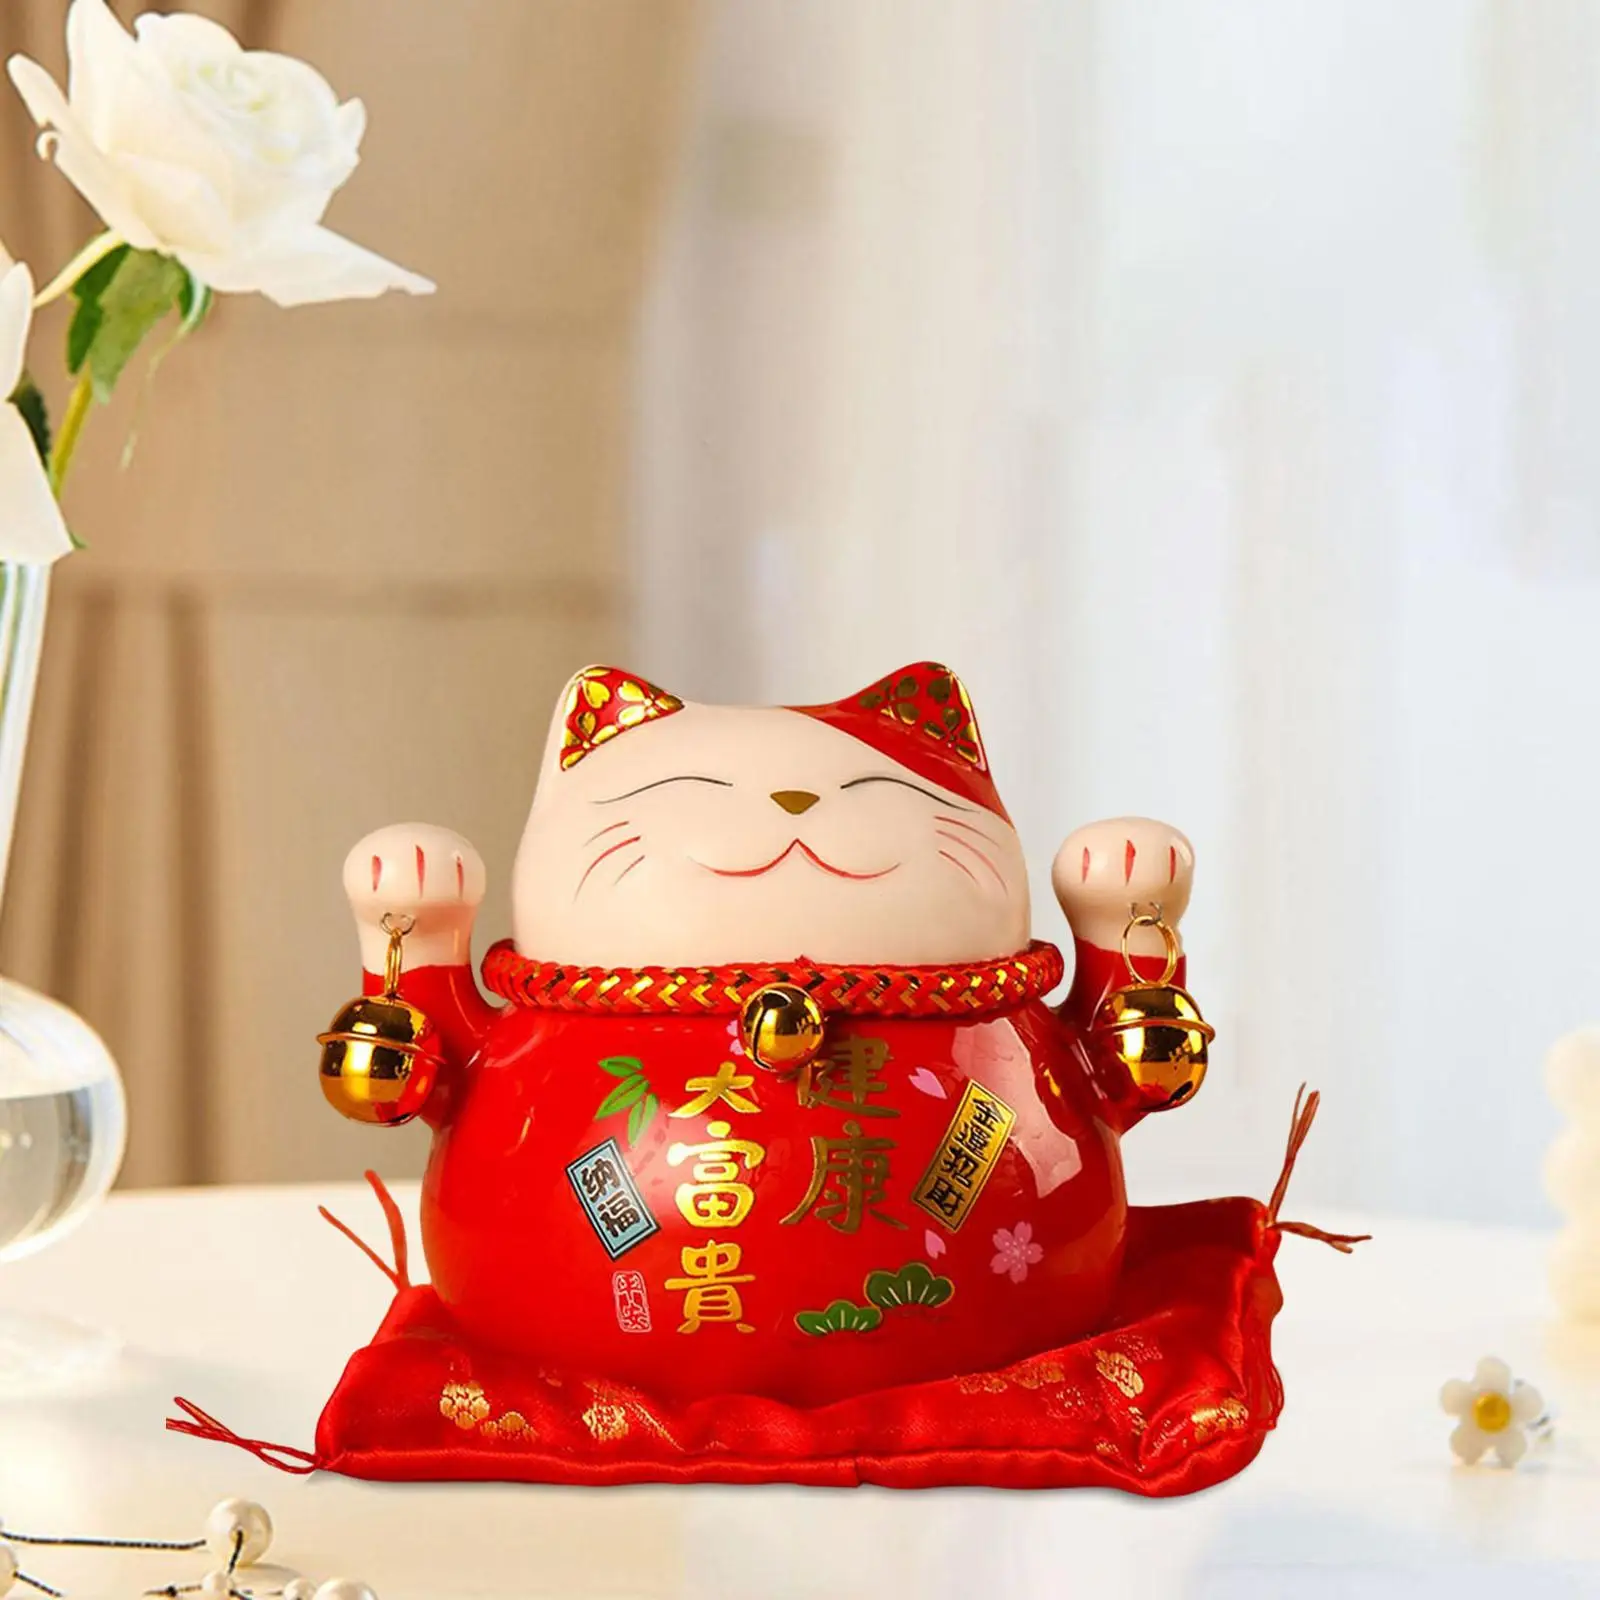 Porcelain Lucky Cat Money Bank Statues Storage Decoration Home Decor Crafts Display Chinese Style for Business Office Tabletop